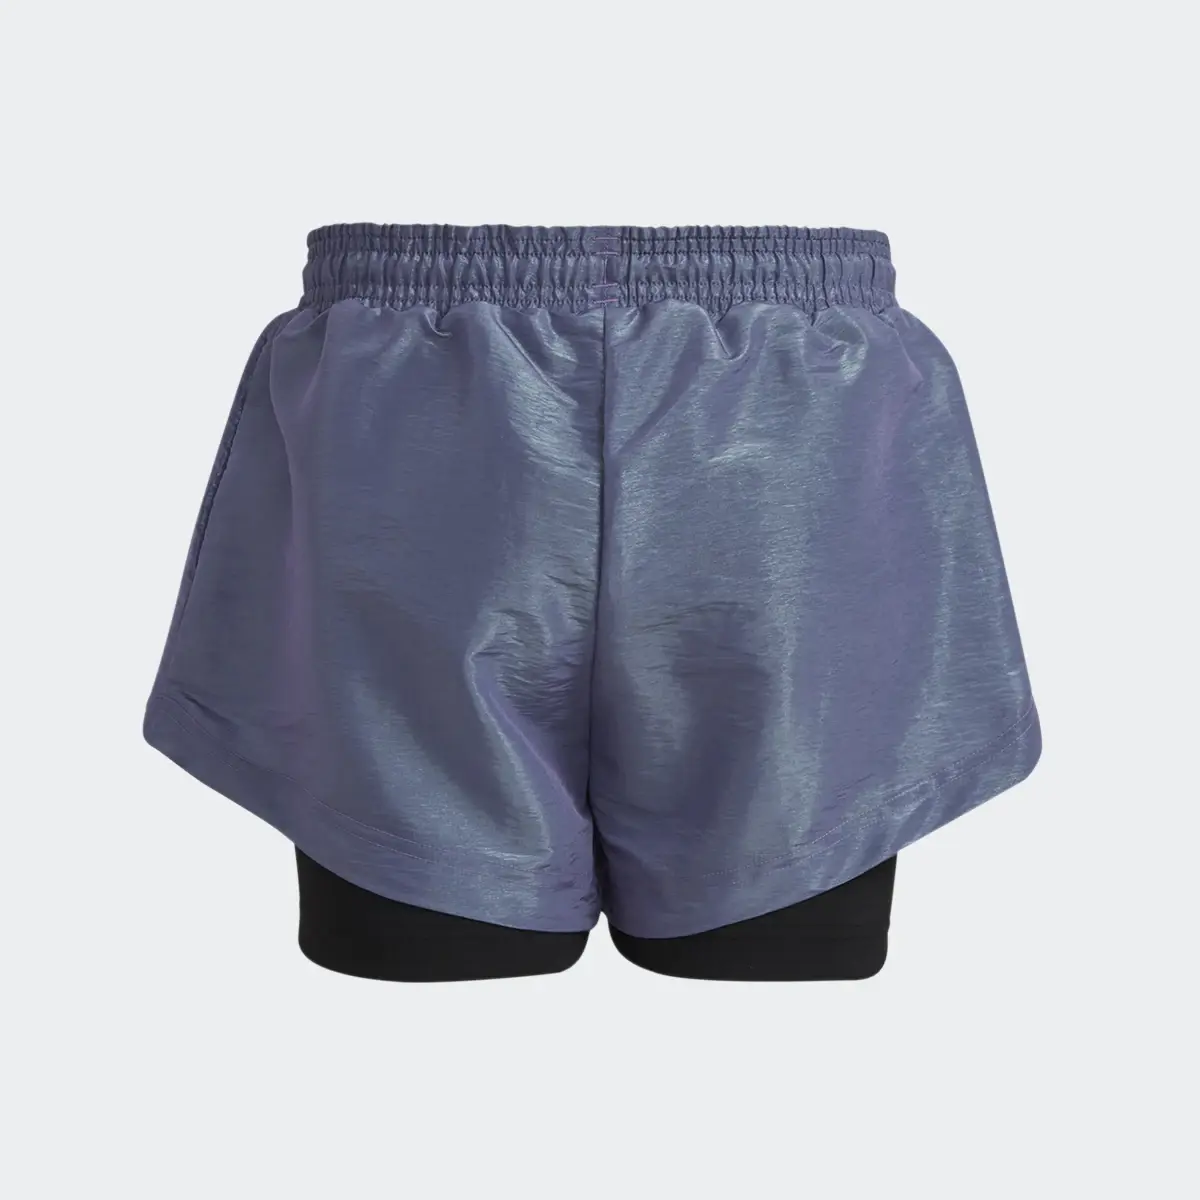 Adidas Dance Loose Fit Two-In-One Shorts. 2